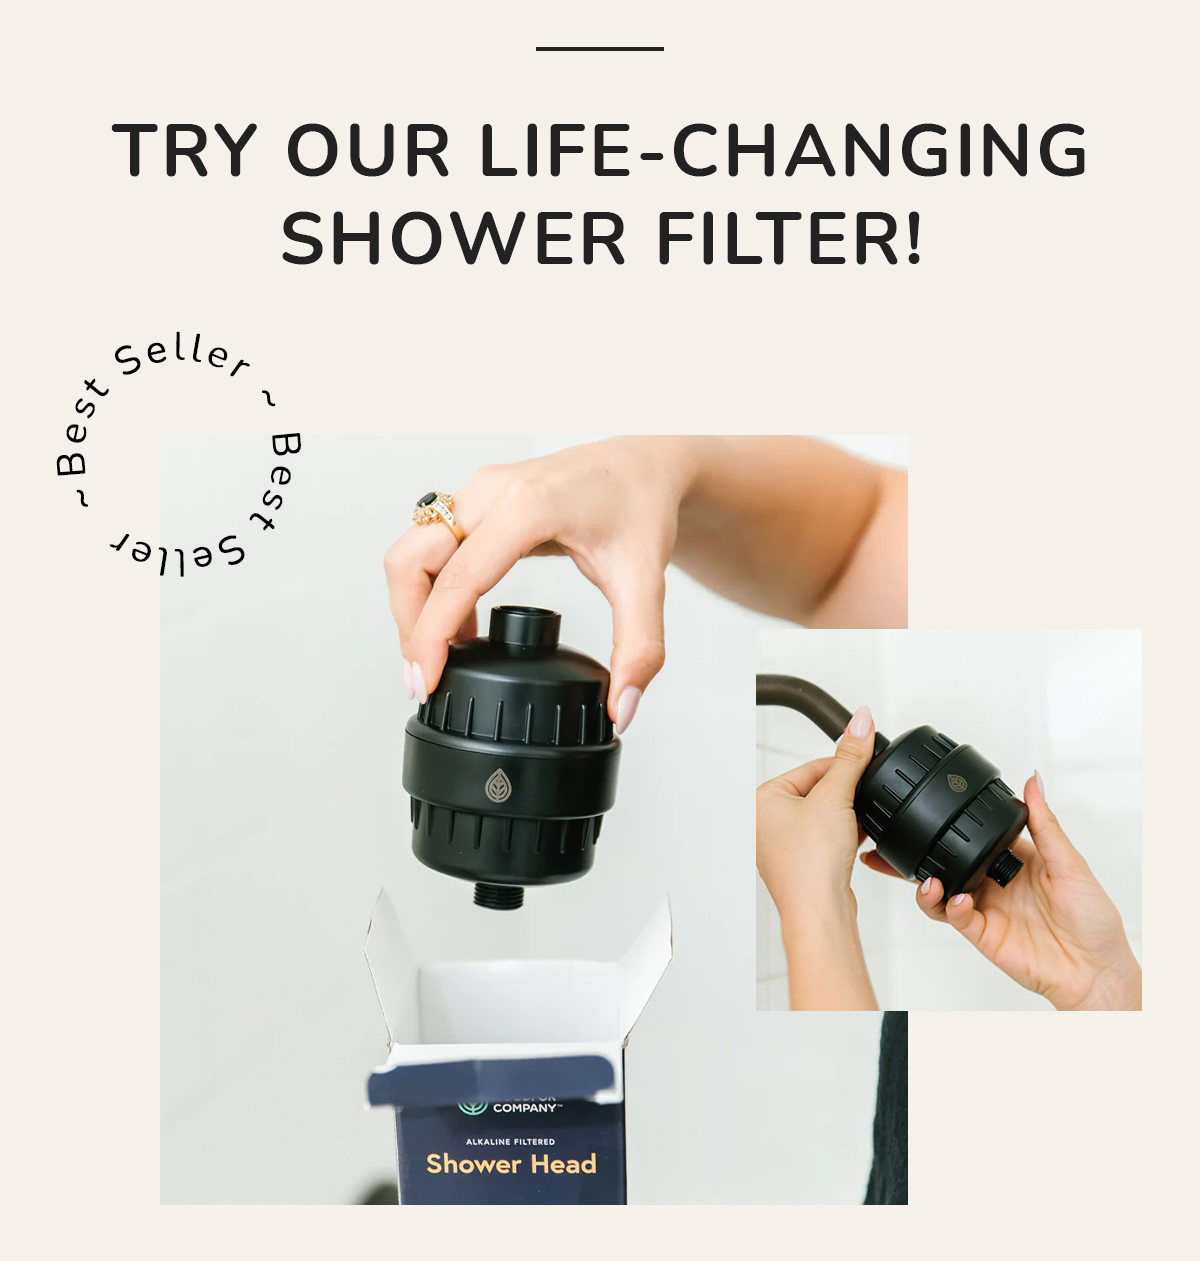 Try our Shower Filter!